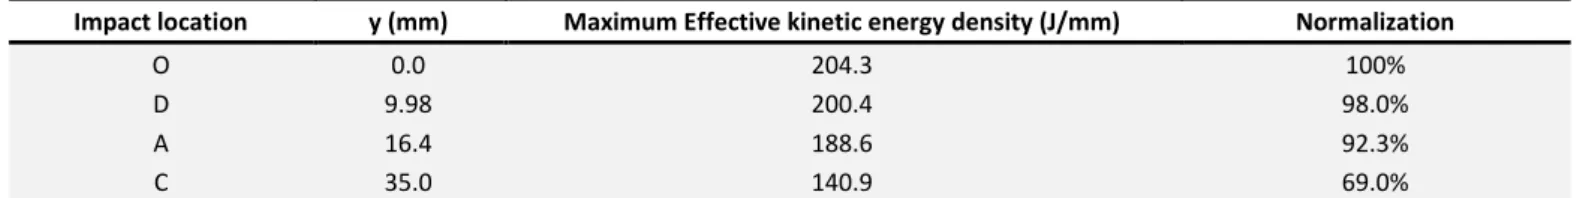 Table 3: The effective kinetic energy of birdstrike of four impact locations. 